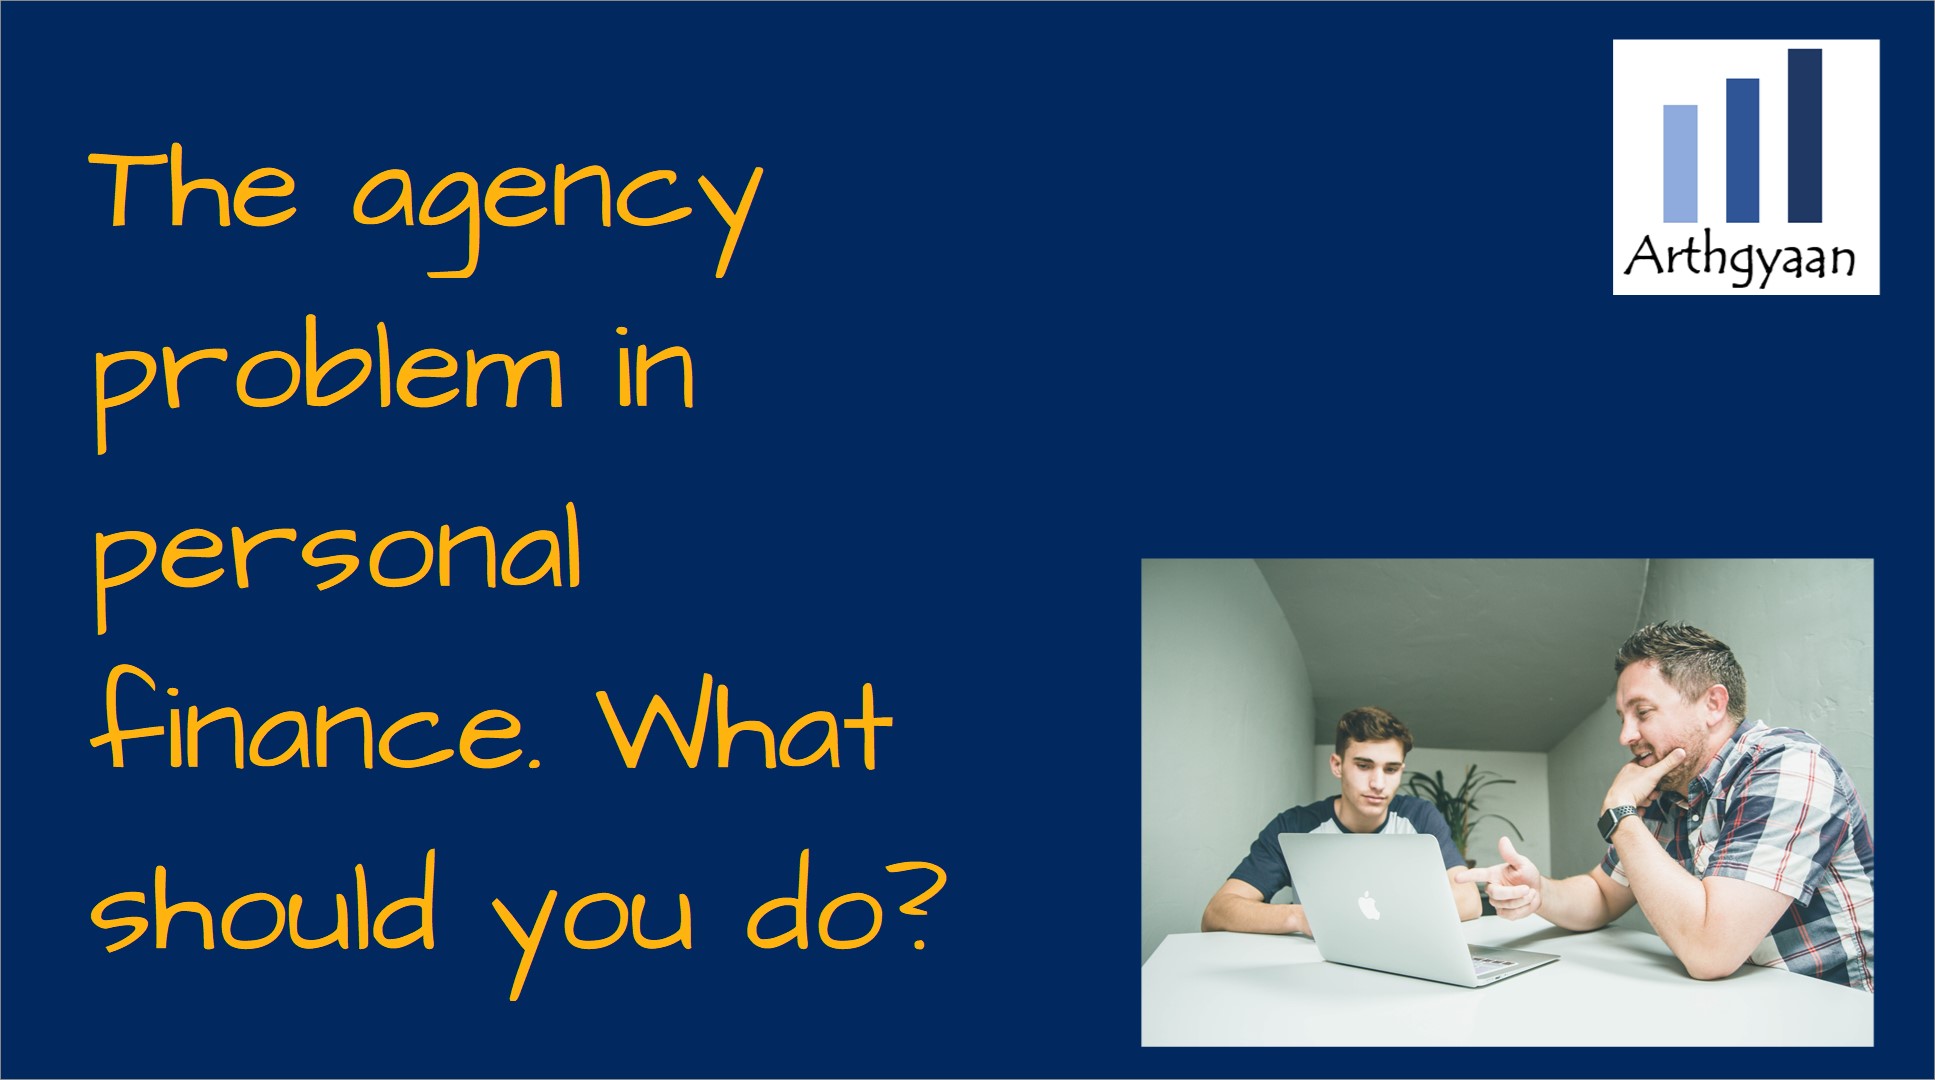 The agency problem in personal finance. What should you do?